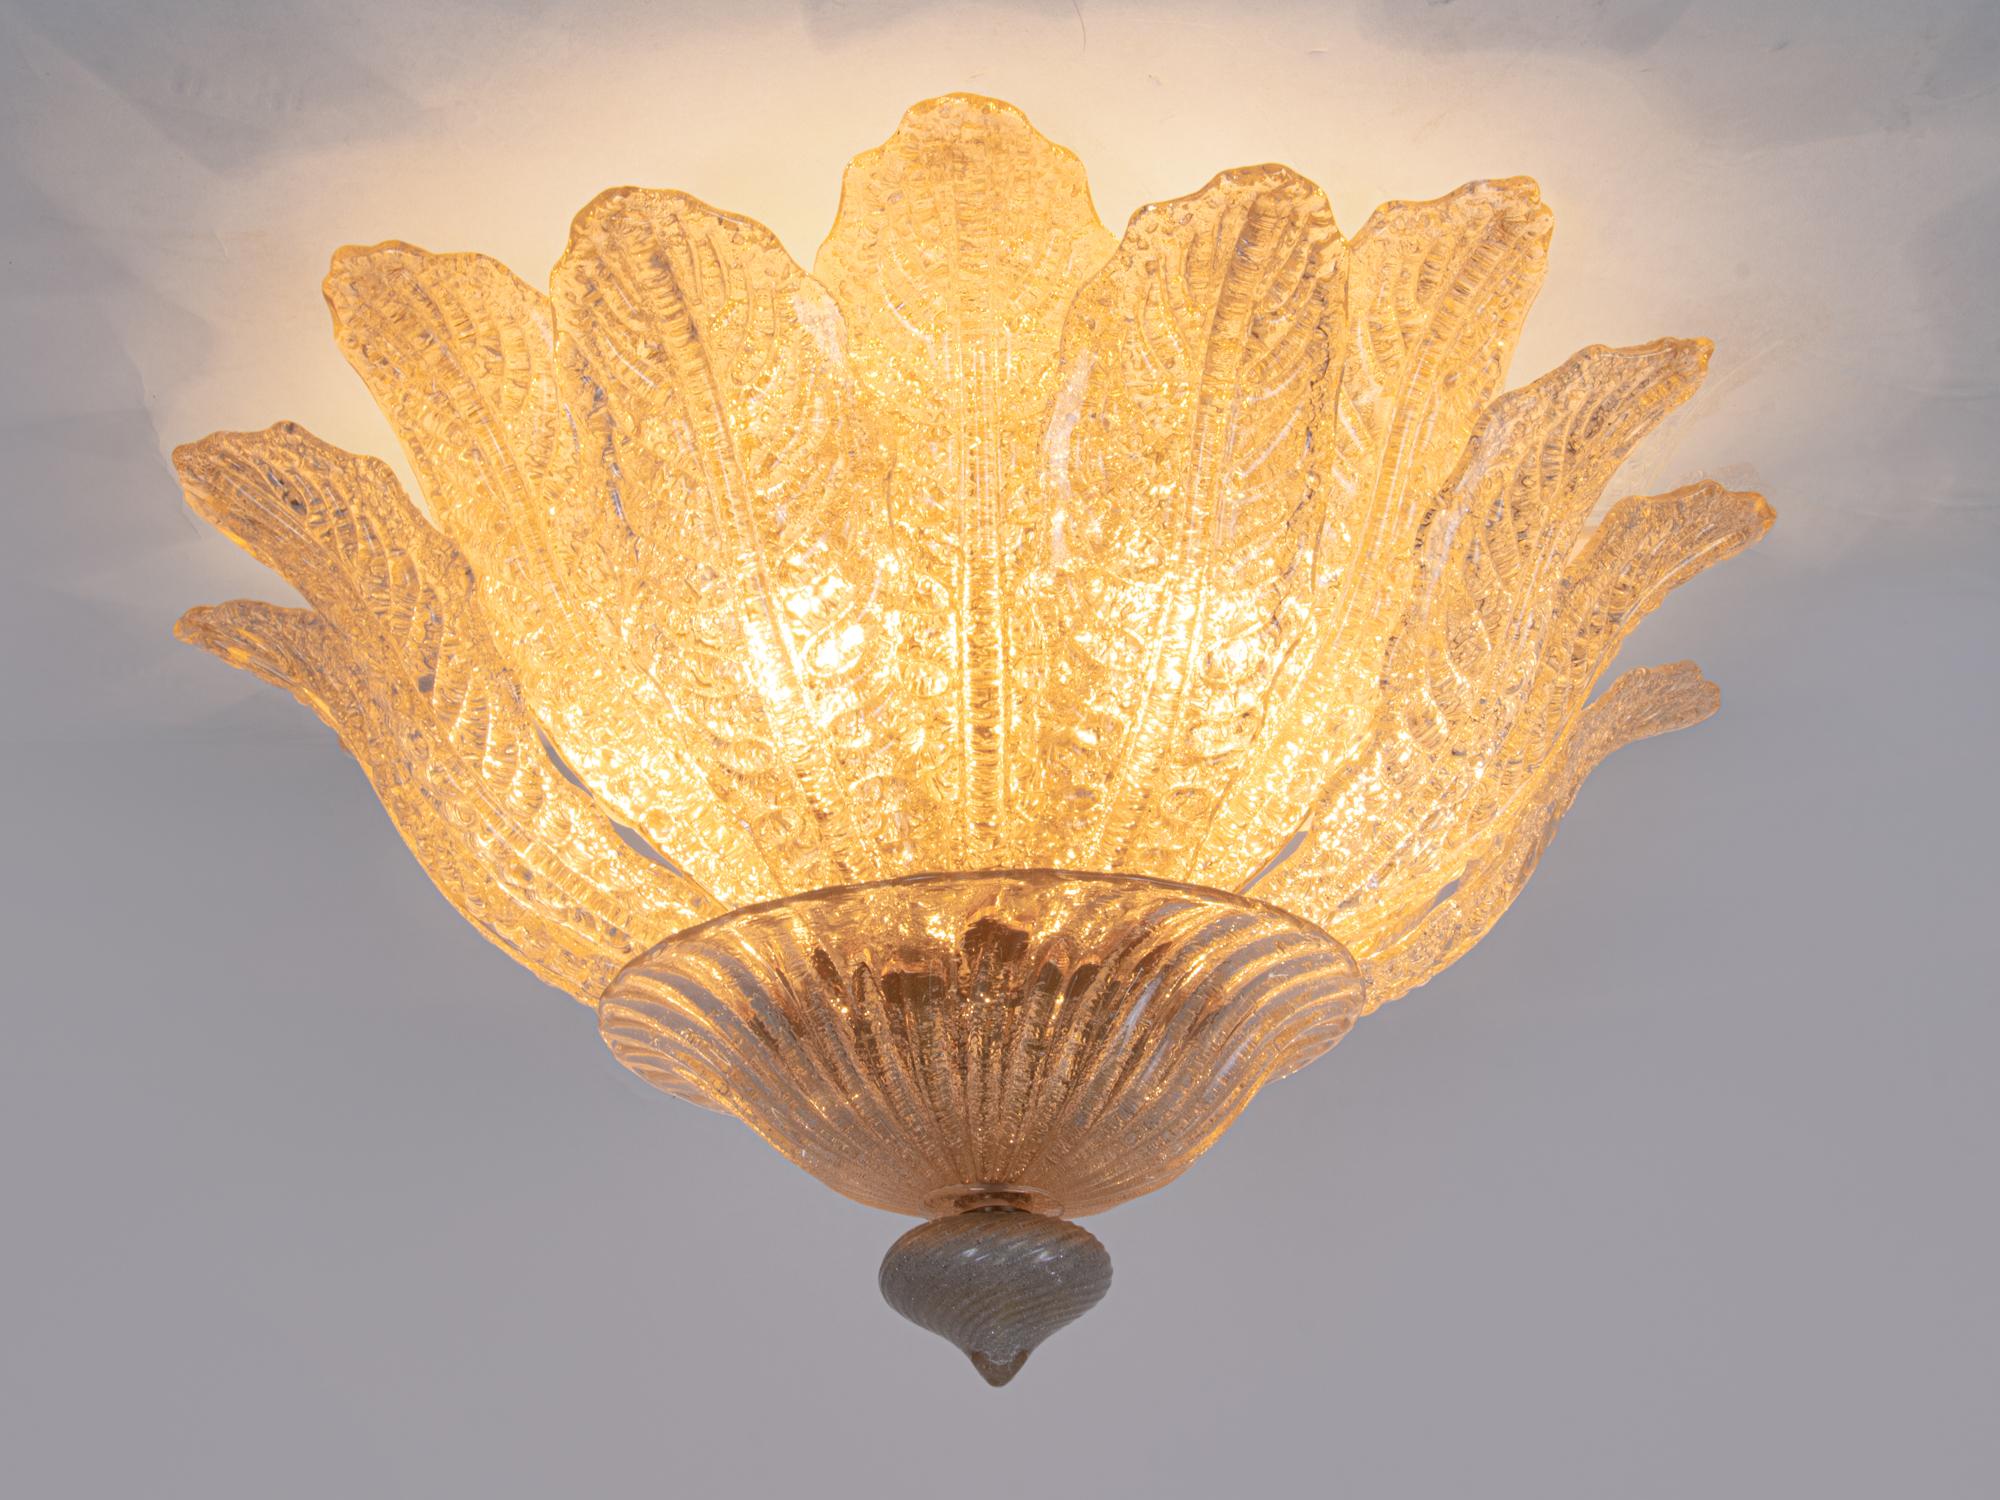 Elegant amber-colored Murano ceiling light with textured gold-dusted Murano glass leaves on a golden brass frame. An elegant floral chandelier made of hand-blown Murano glass in amber-golden “Rugiada” technique. Heavy duty. Has 6 sockets. In very